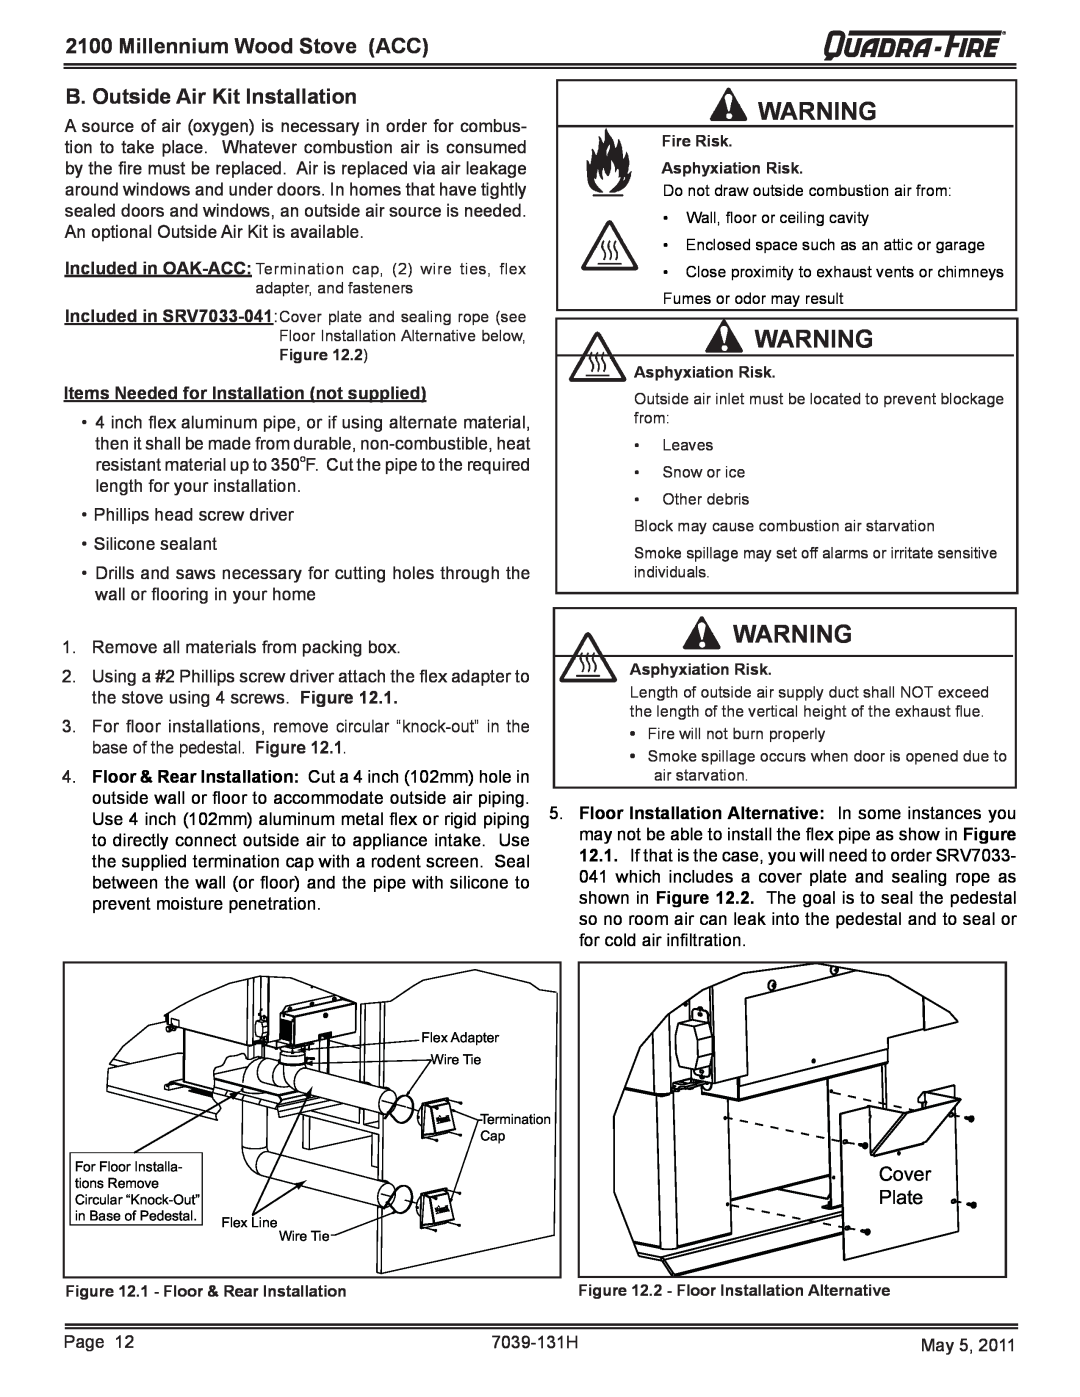 Quadra-Fire 21M-ACC owner manual Millennium Wood Stove ACC, B. Outside Air Kit Installation, Cover Plate 